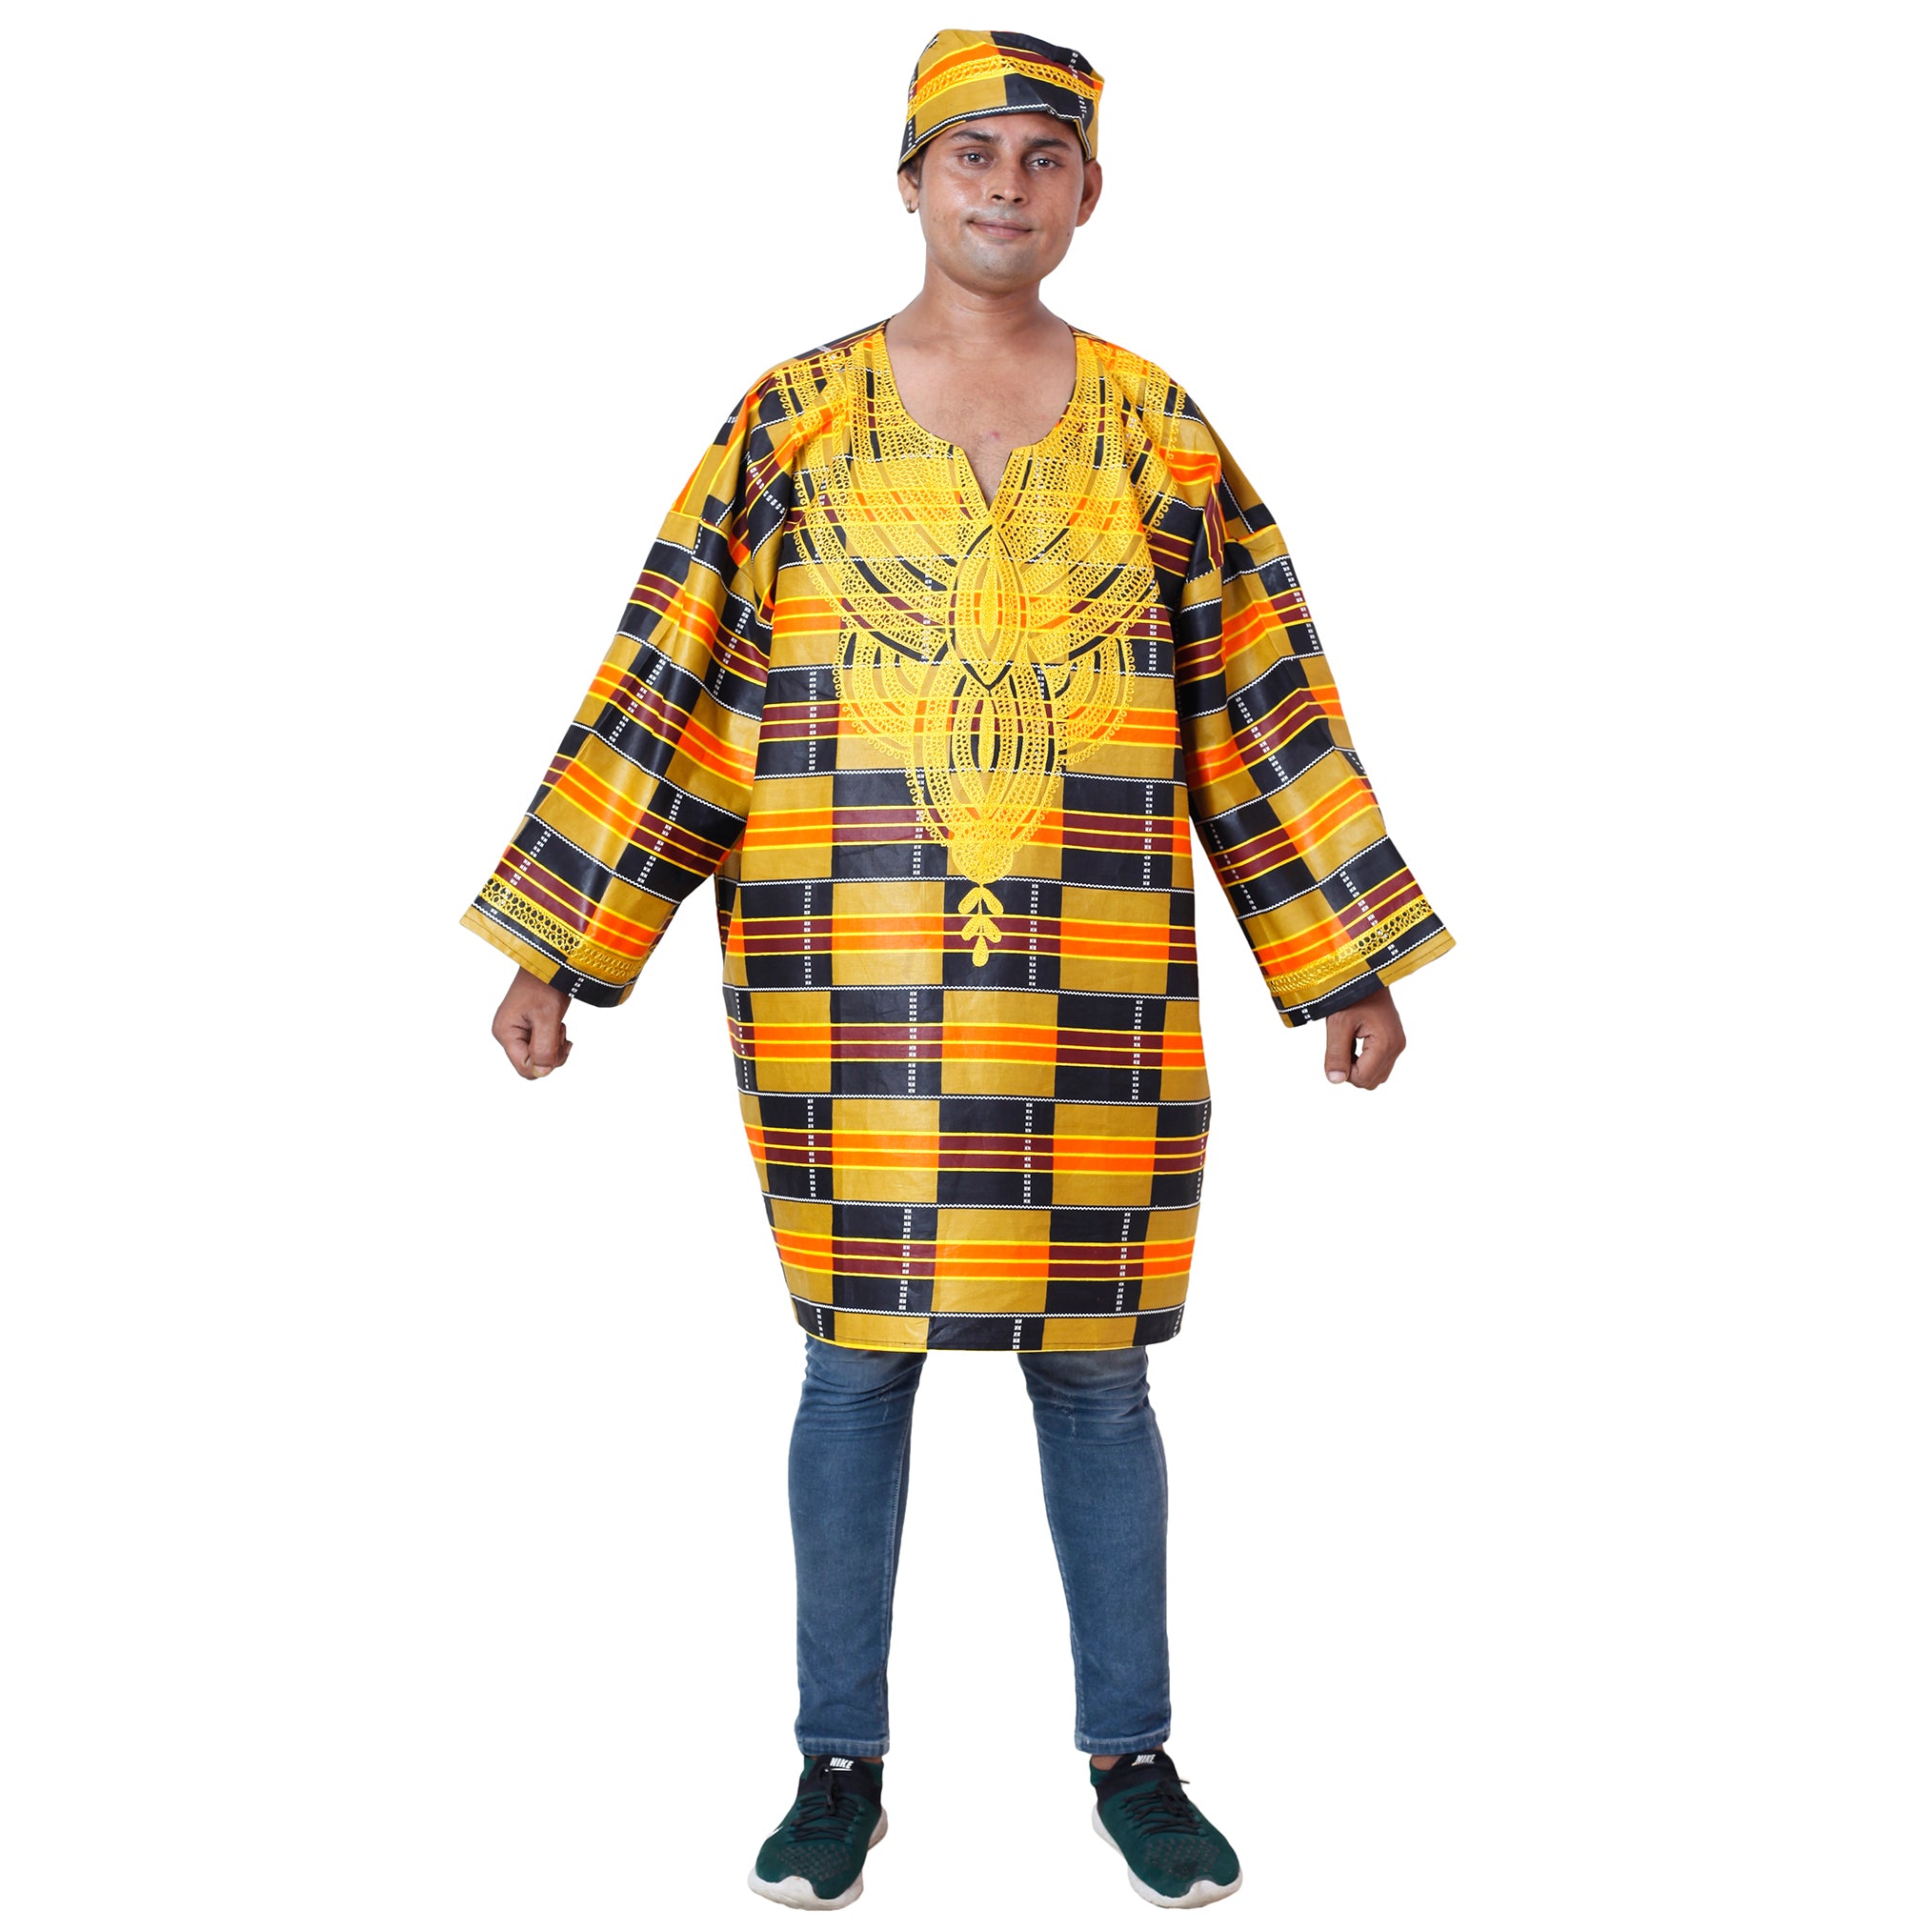 Men's African Print Super Plus Size Shirt with Hat -- FI-P15